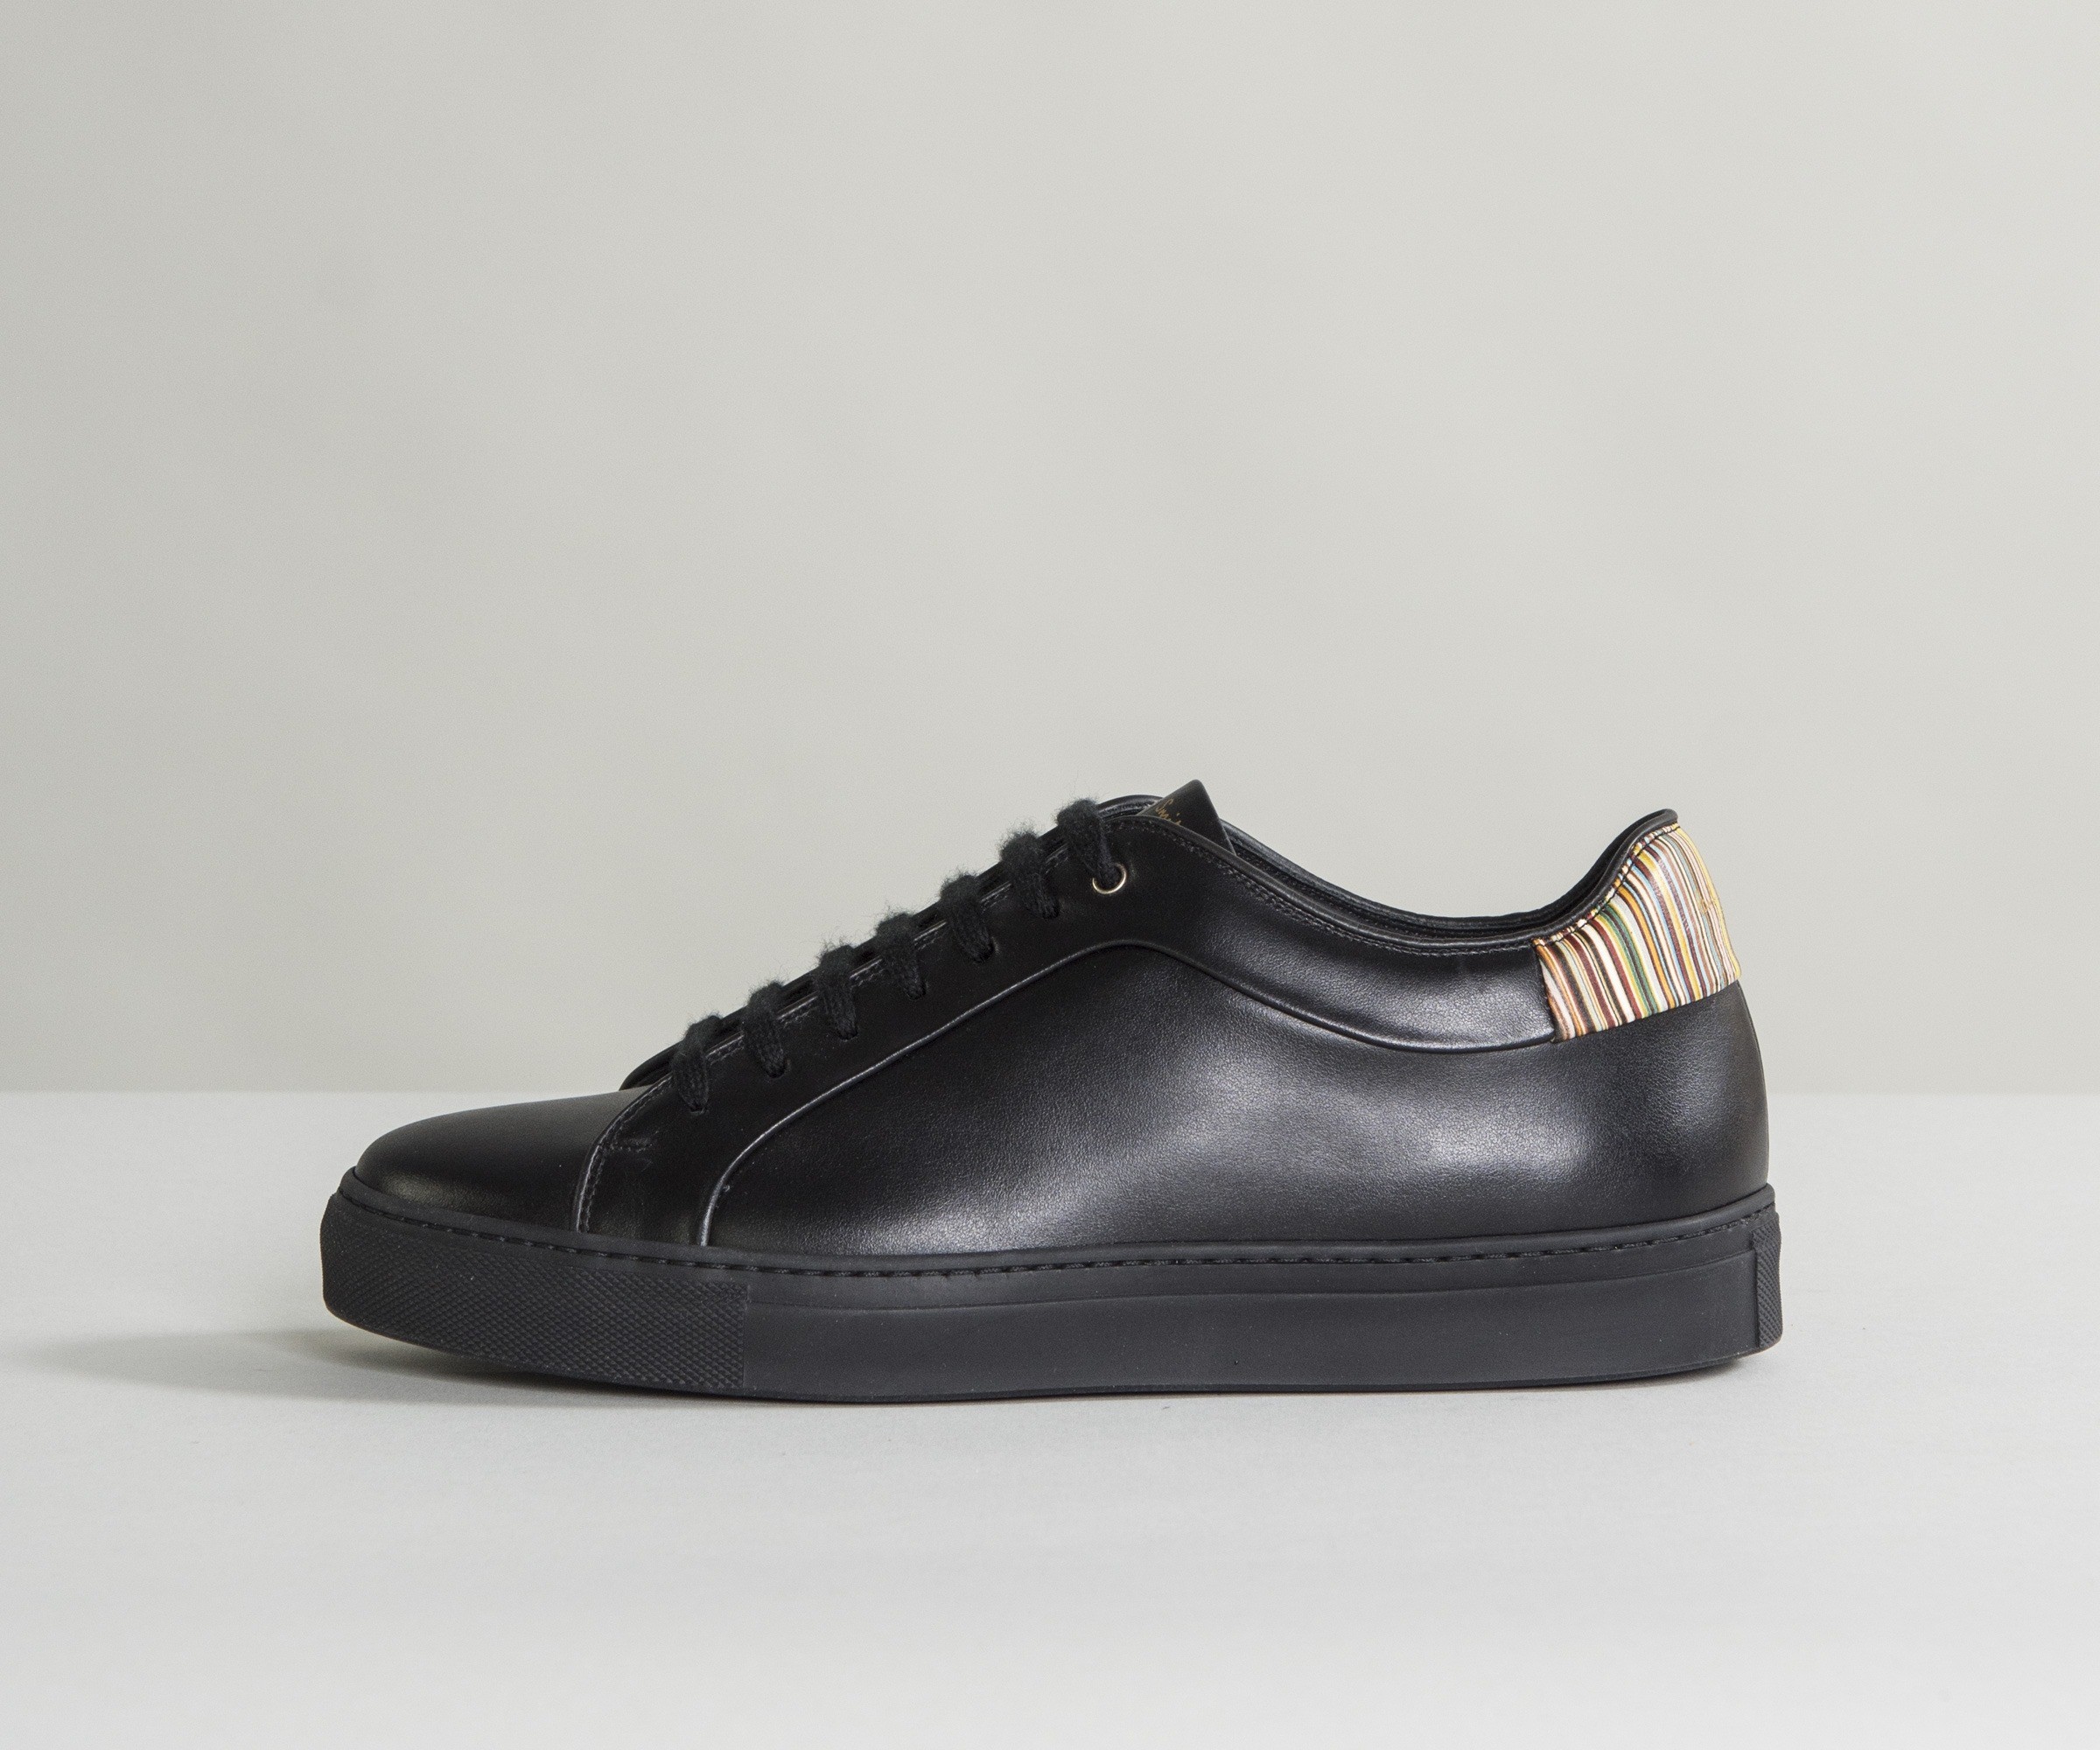 Paul Smith Shoes Shoes 'Basso' Trainers With Multi Stripe Heel Black